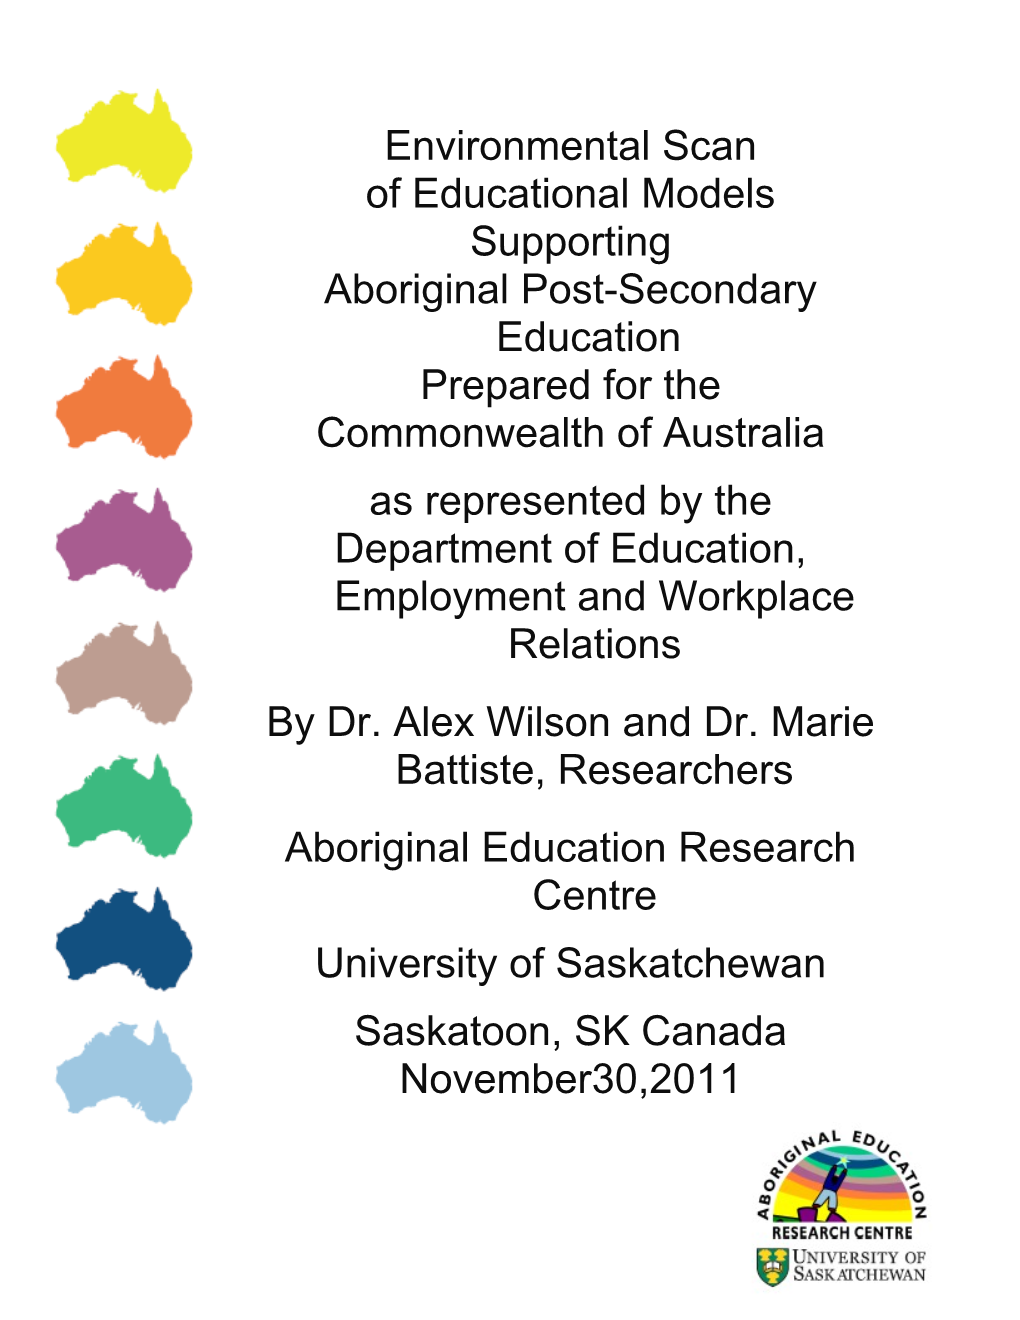 Environmental Scan of Educational Models Supporting Aboriginal Post-Secondary Education